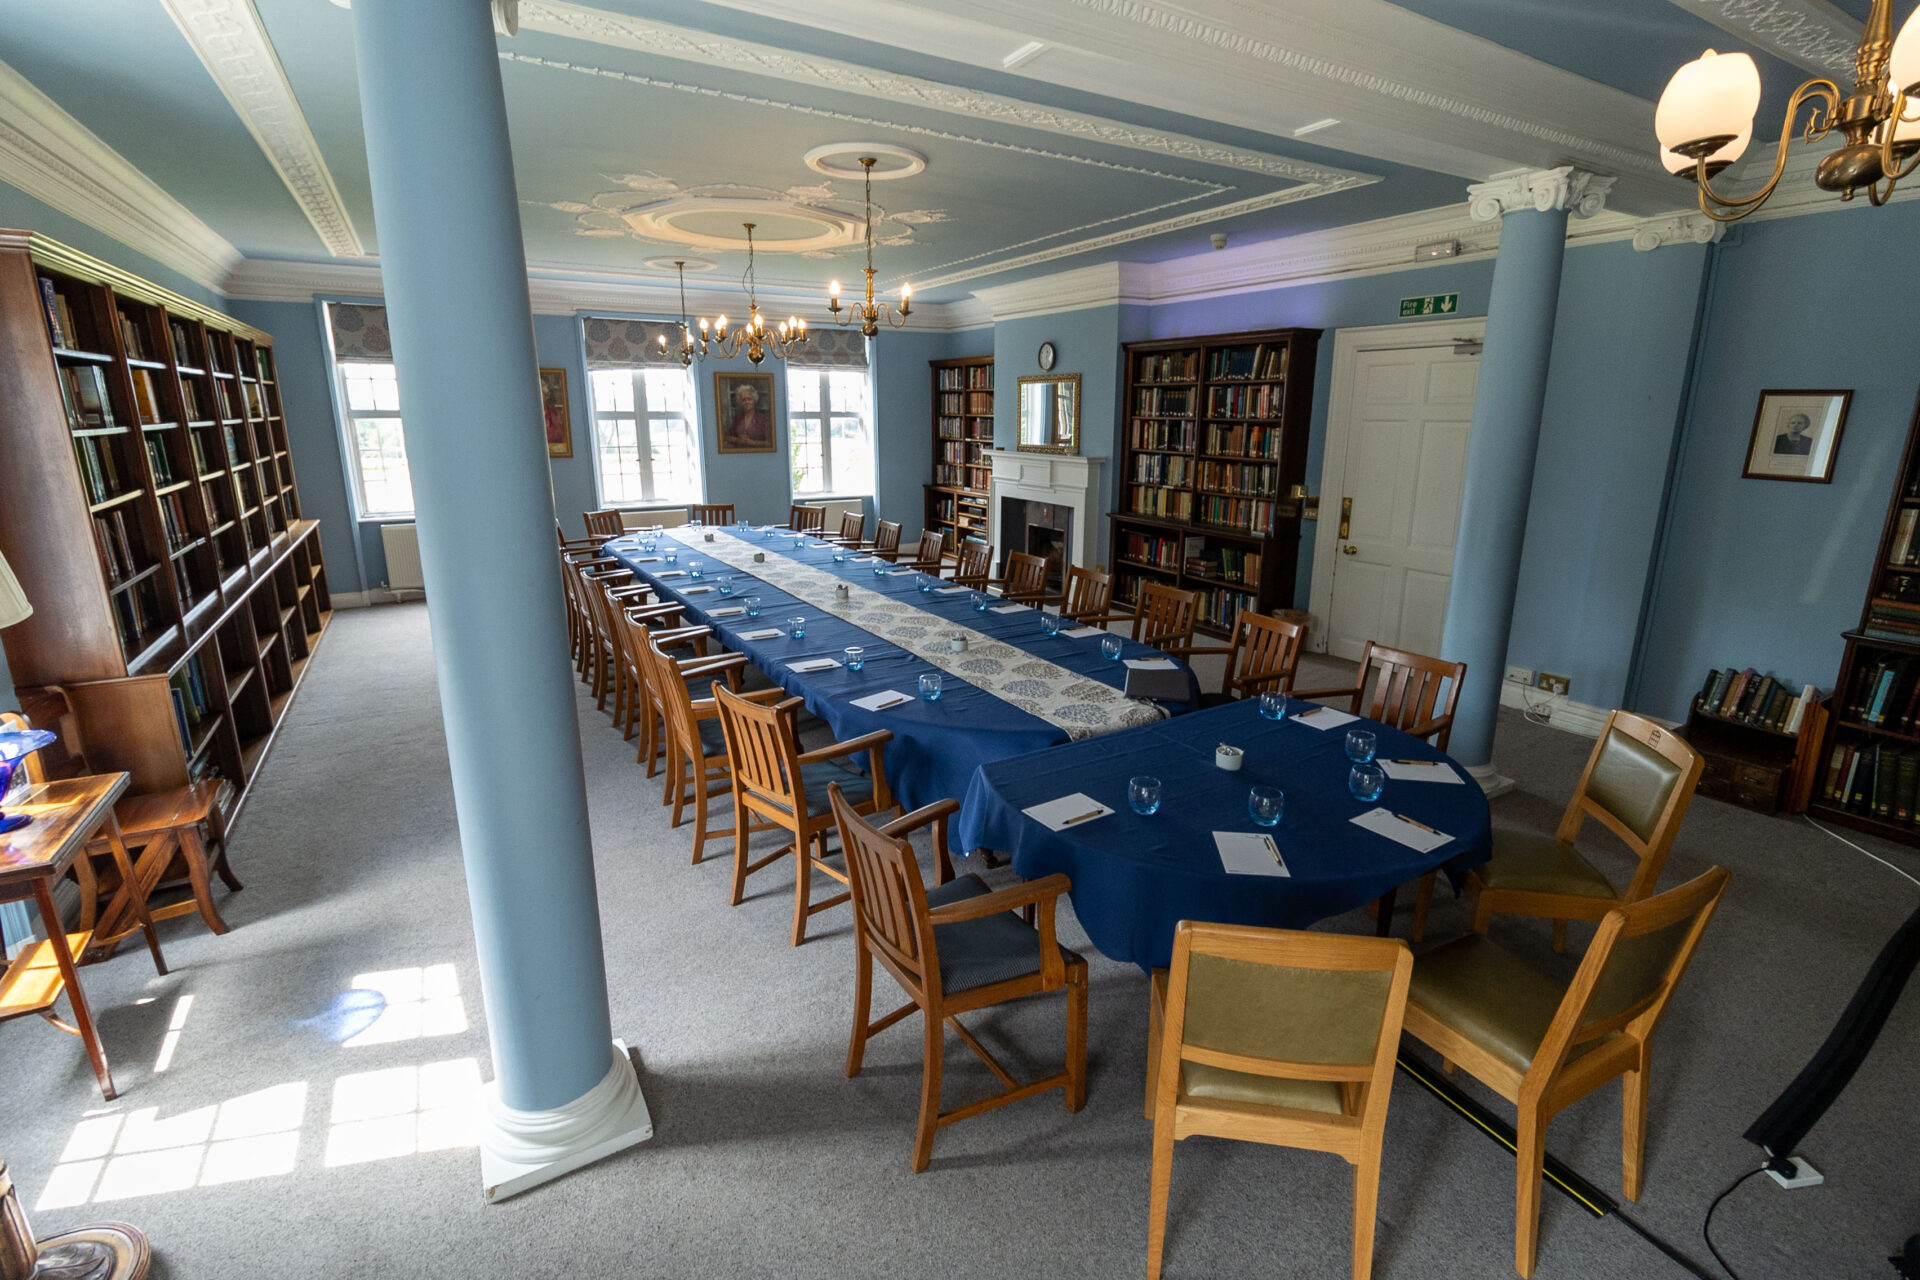 The Amy Buller Library in Cumberland Lodge, set up to accommodate 25 guests